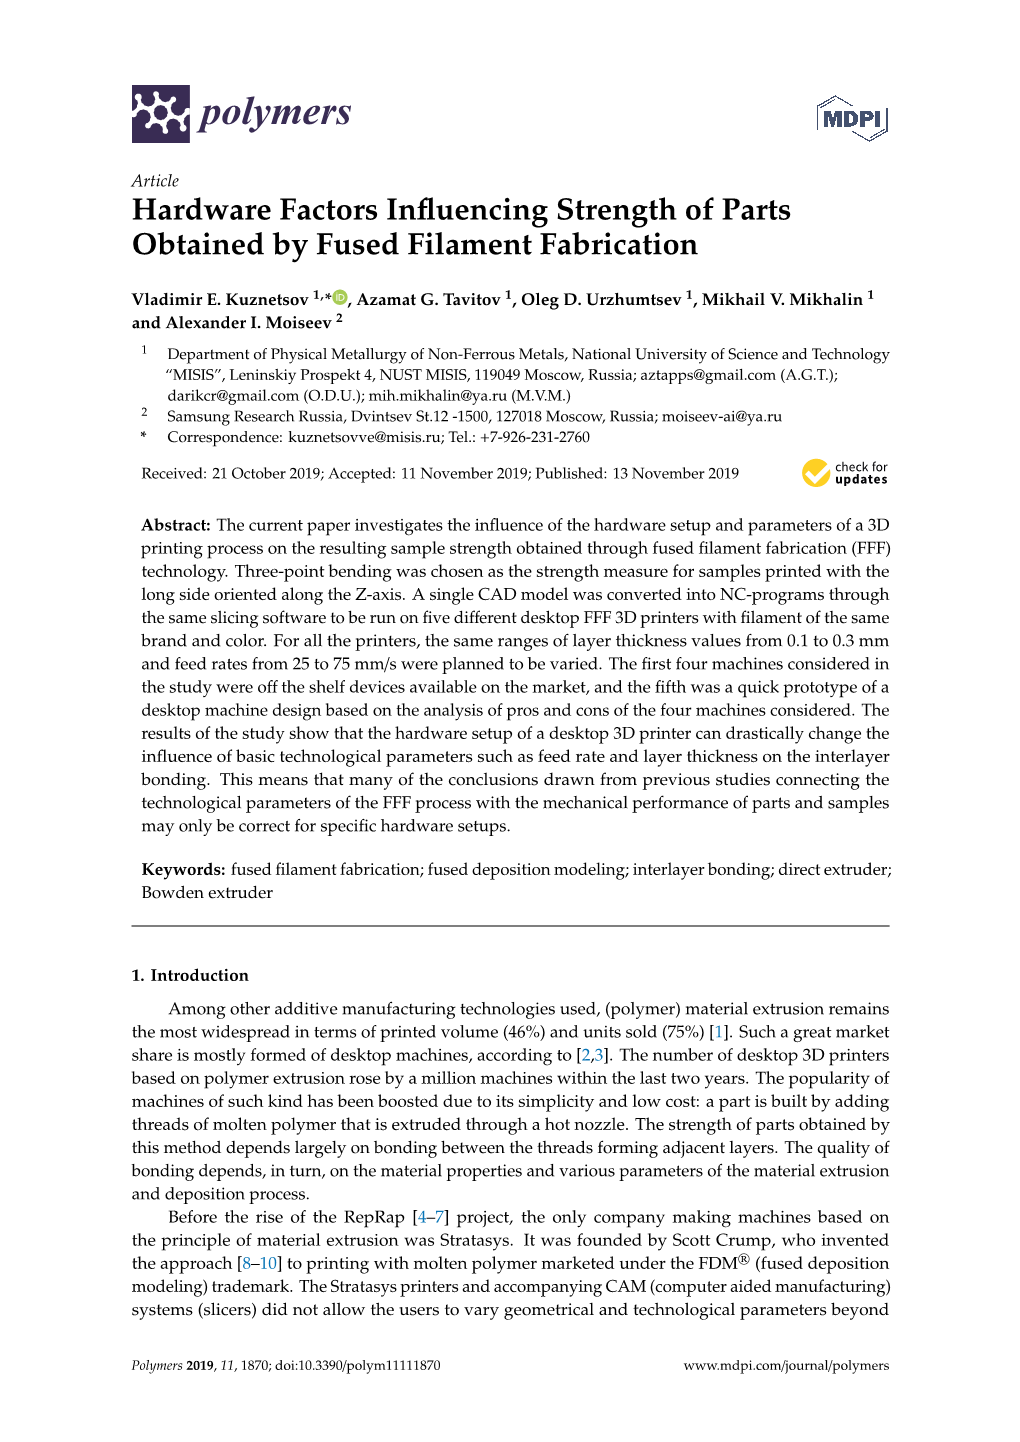 Hardware Factors Influencing Strength of Parts Obtained by Fused Filament Fabrication